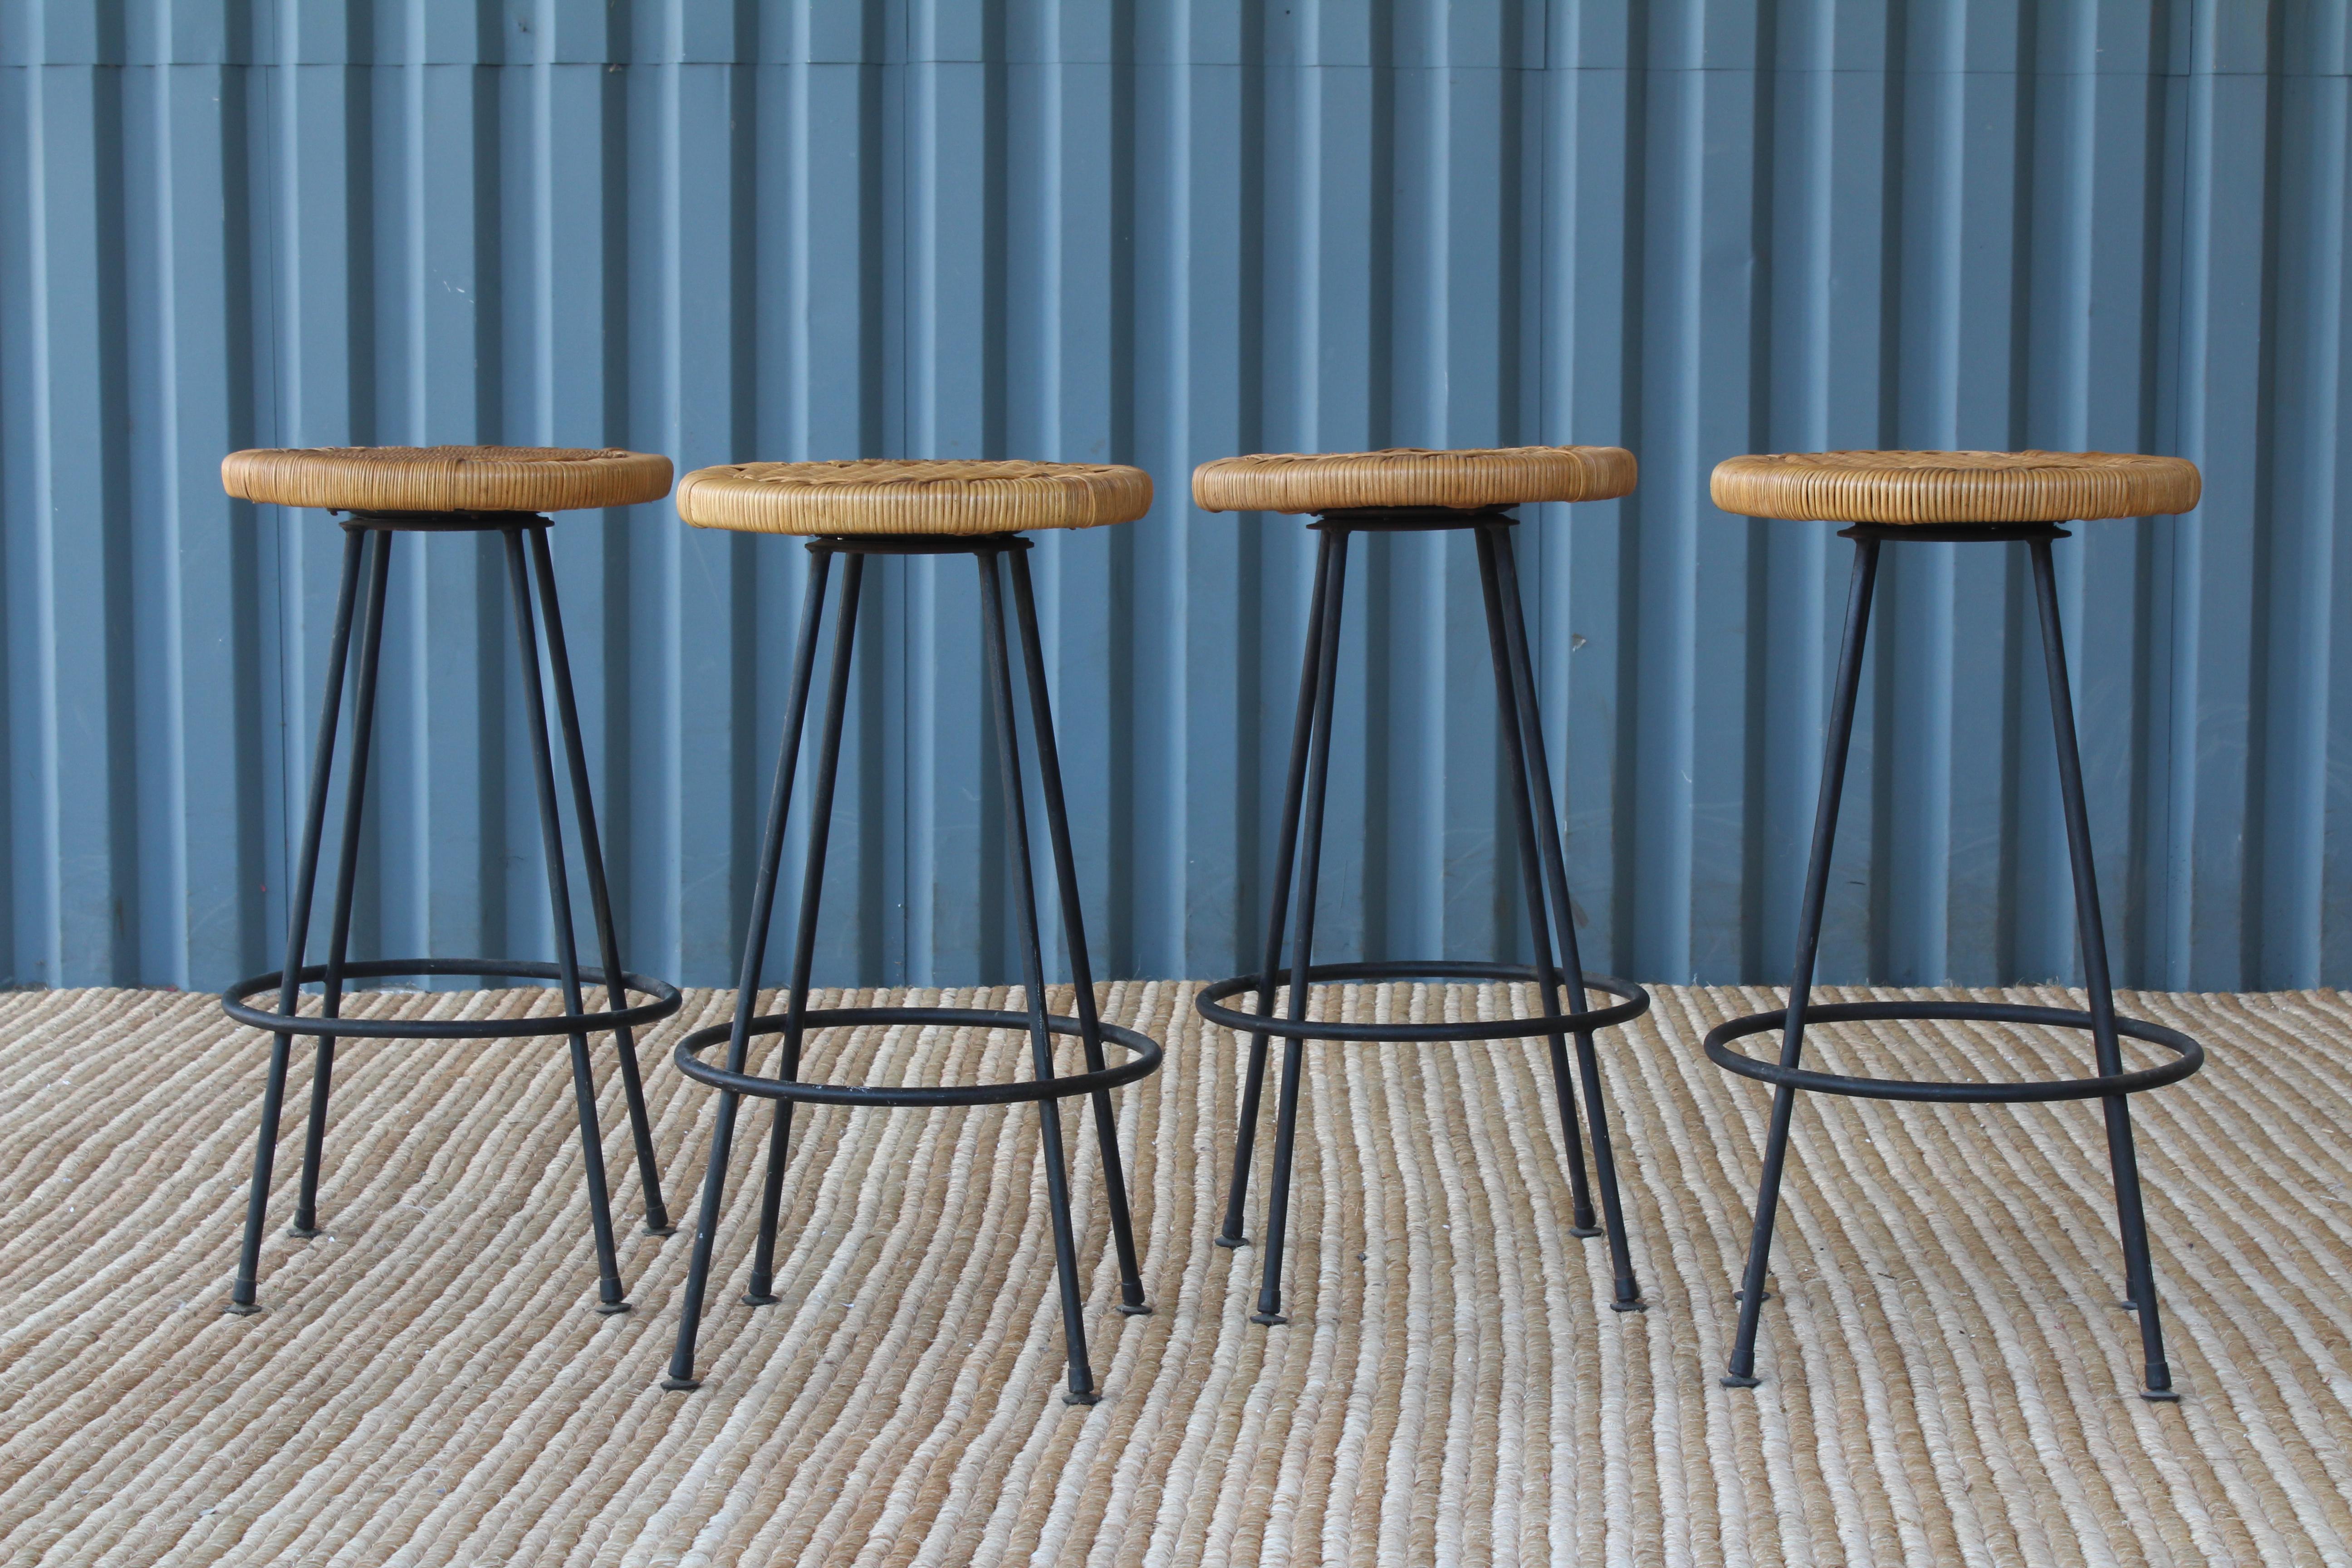 Set of four 1950s iron bar stools with rattan seats. Seats have new rattan and swivel. Sold as a set.